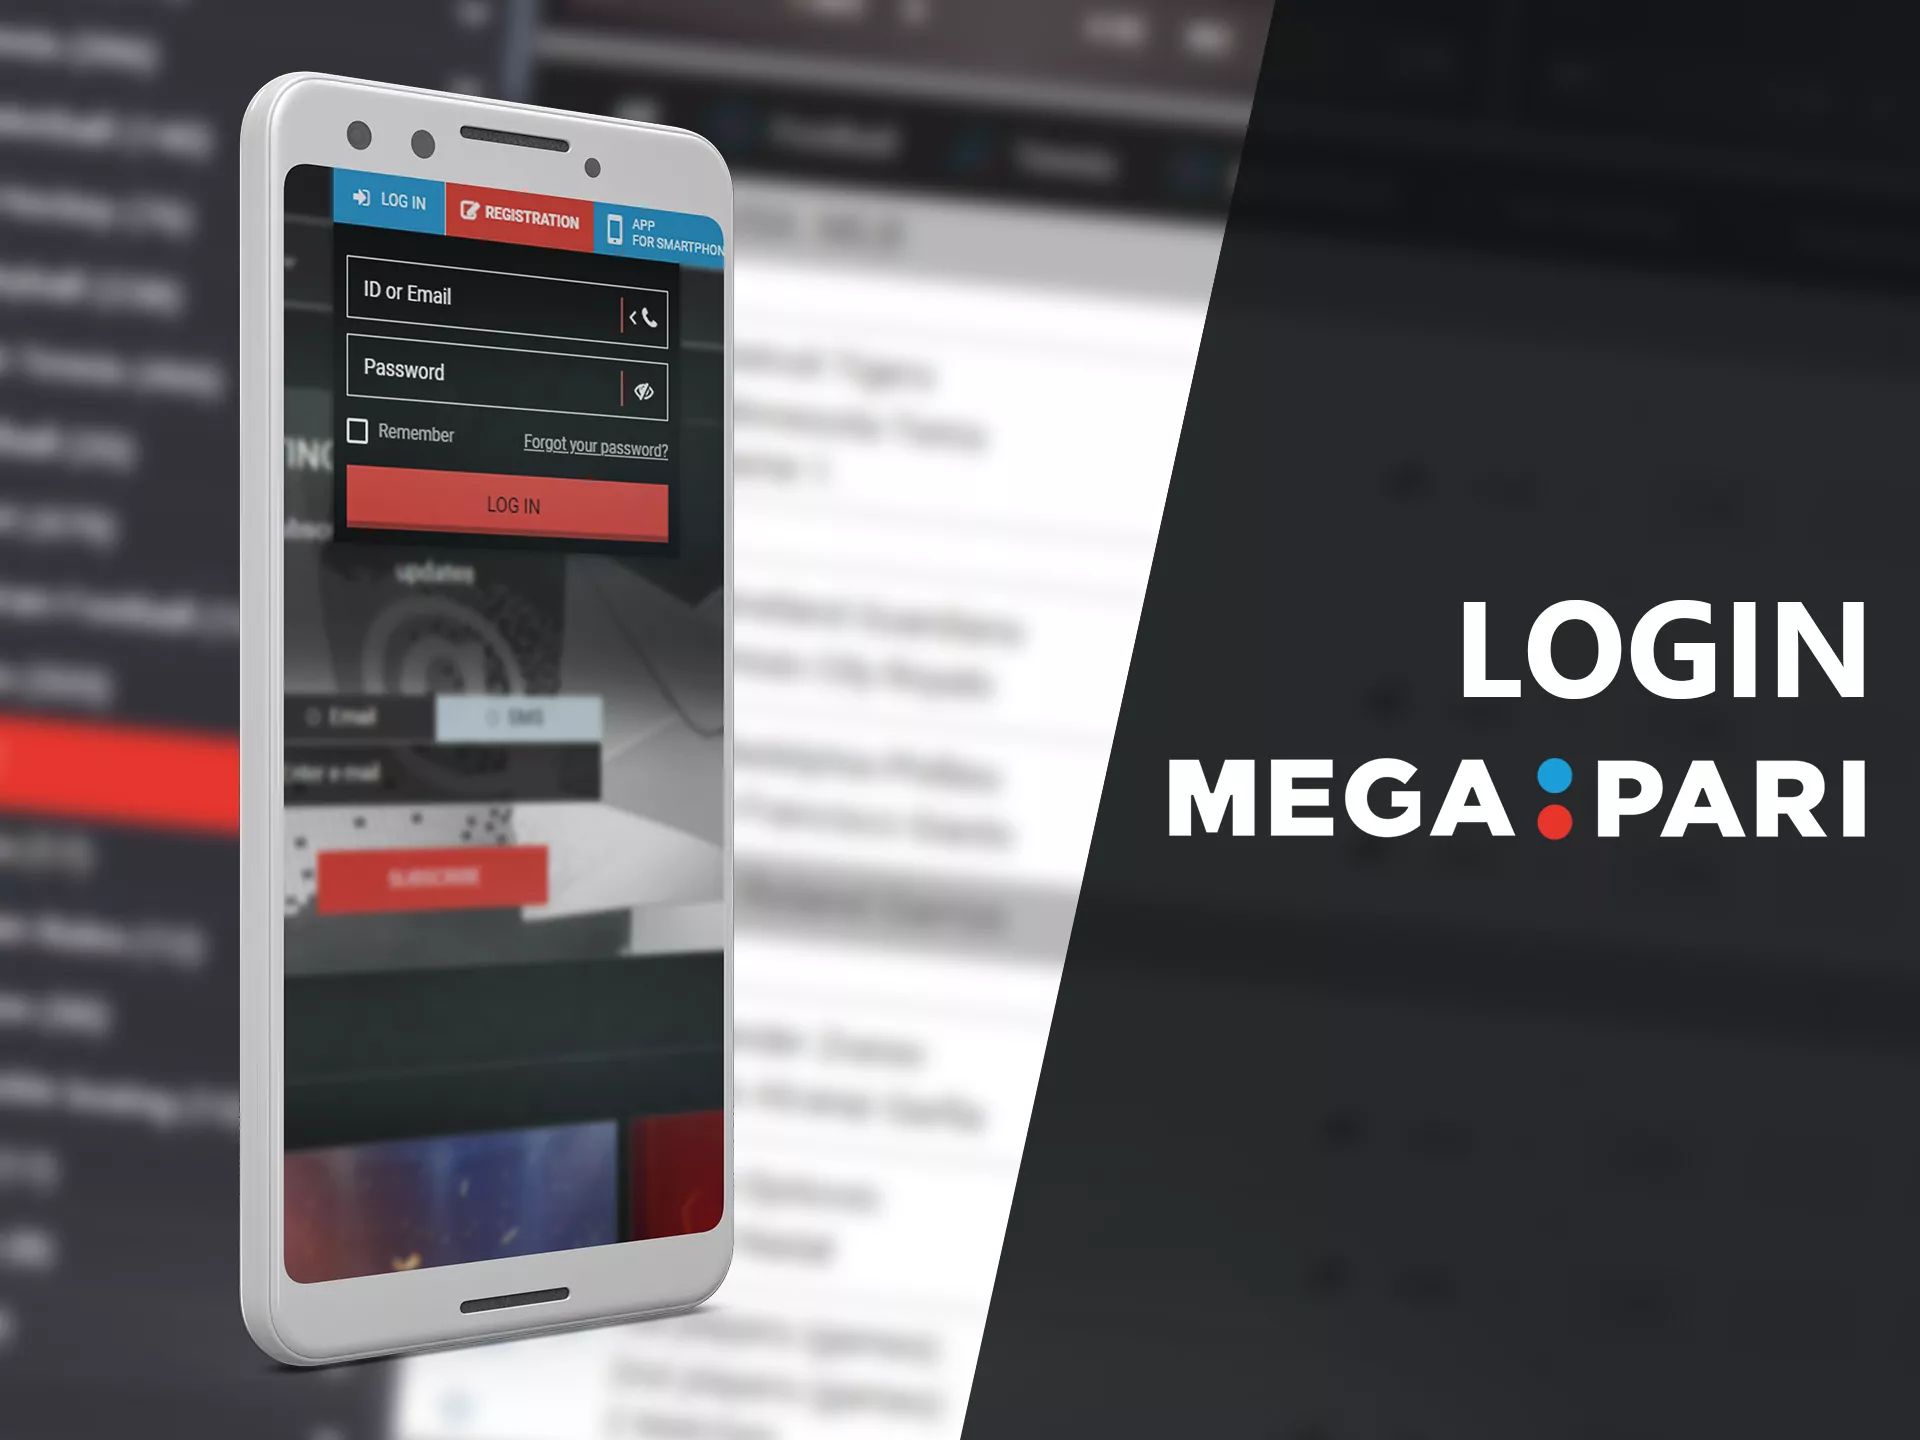 Log in to Mega Pari using your email and password.